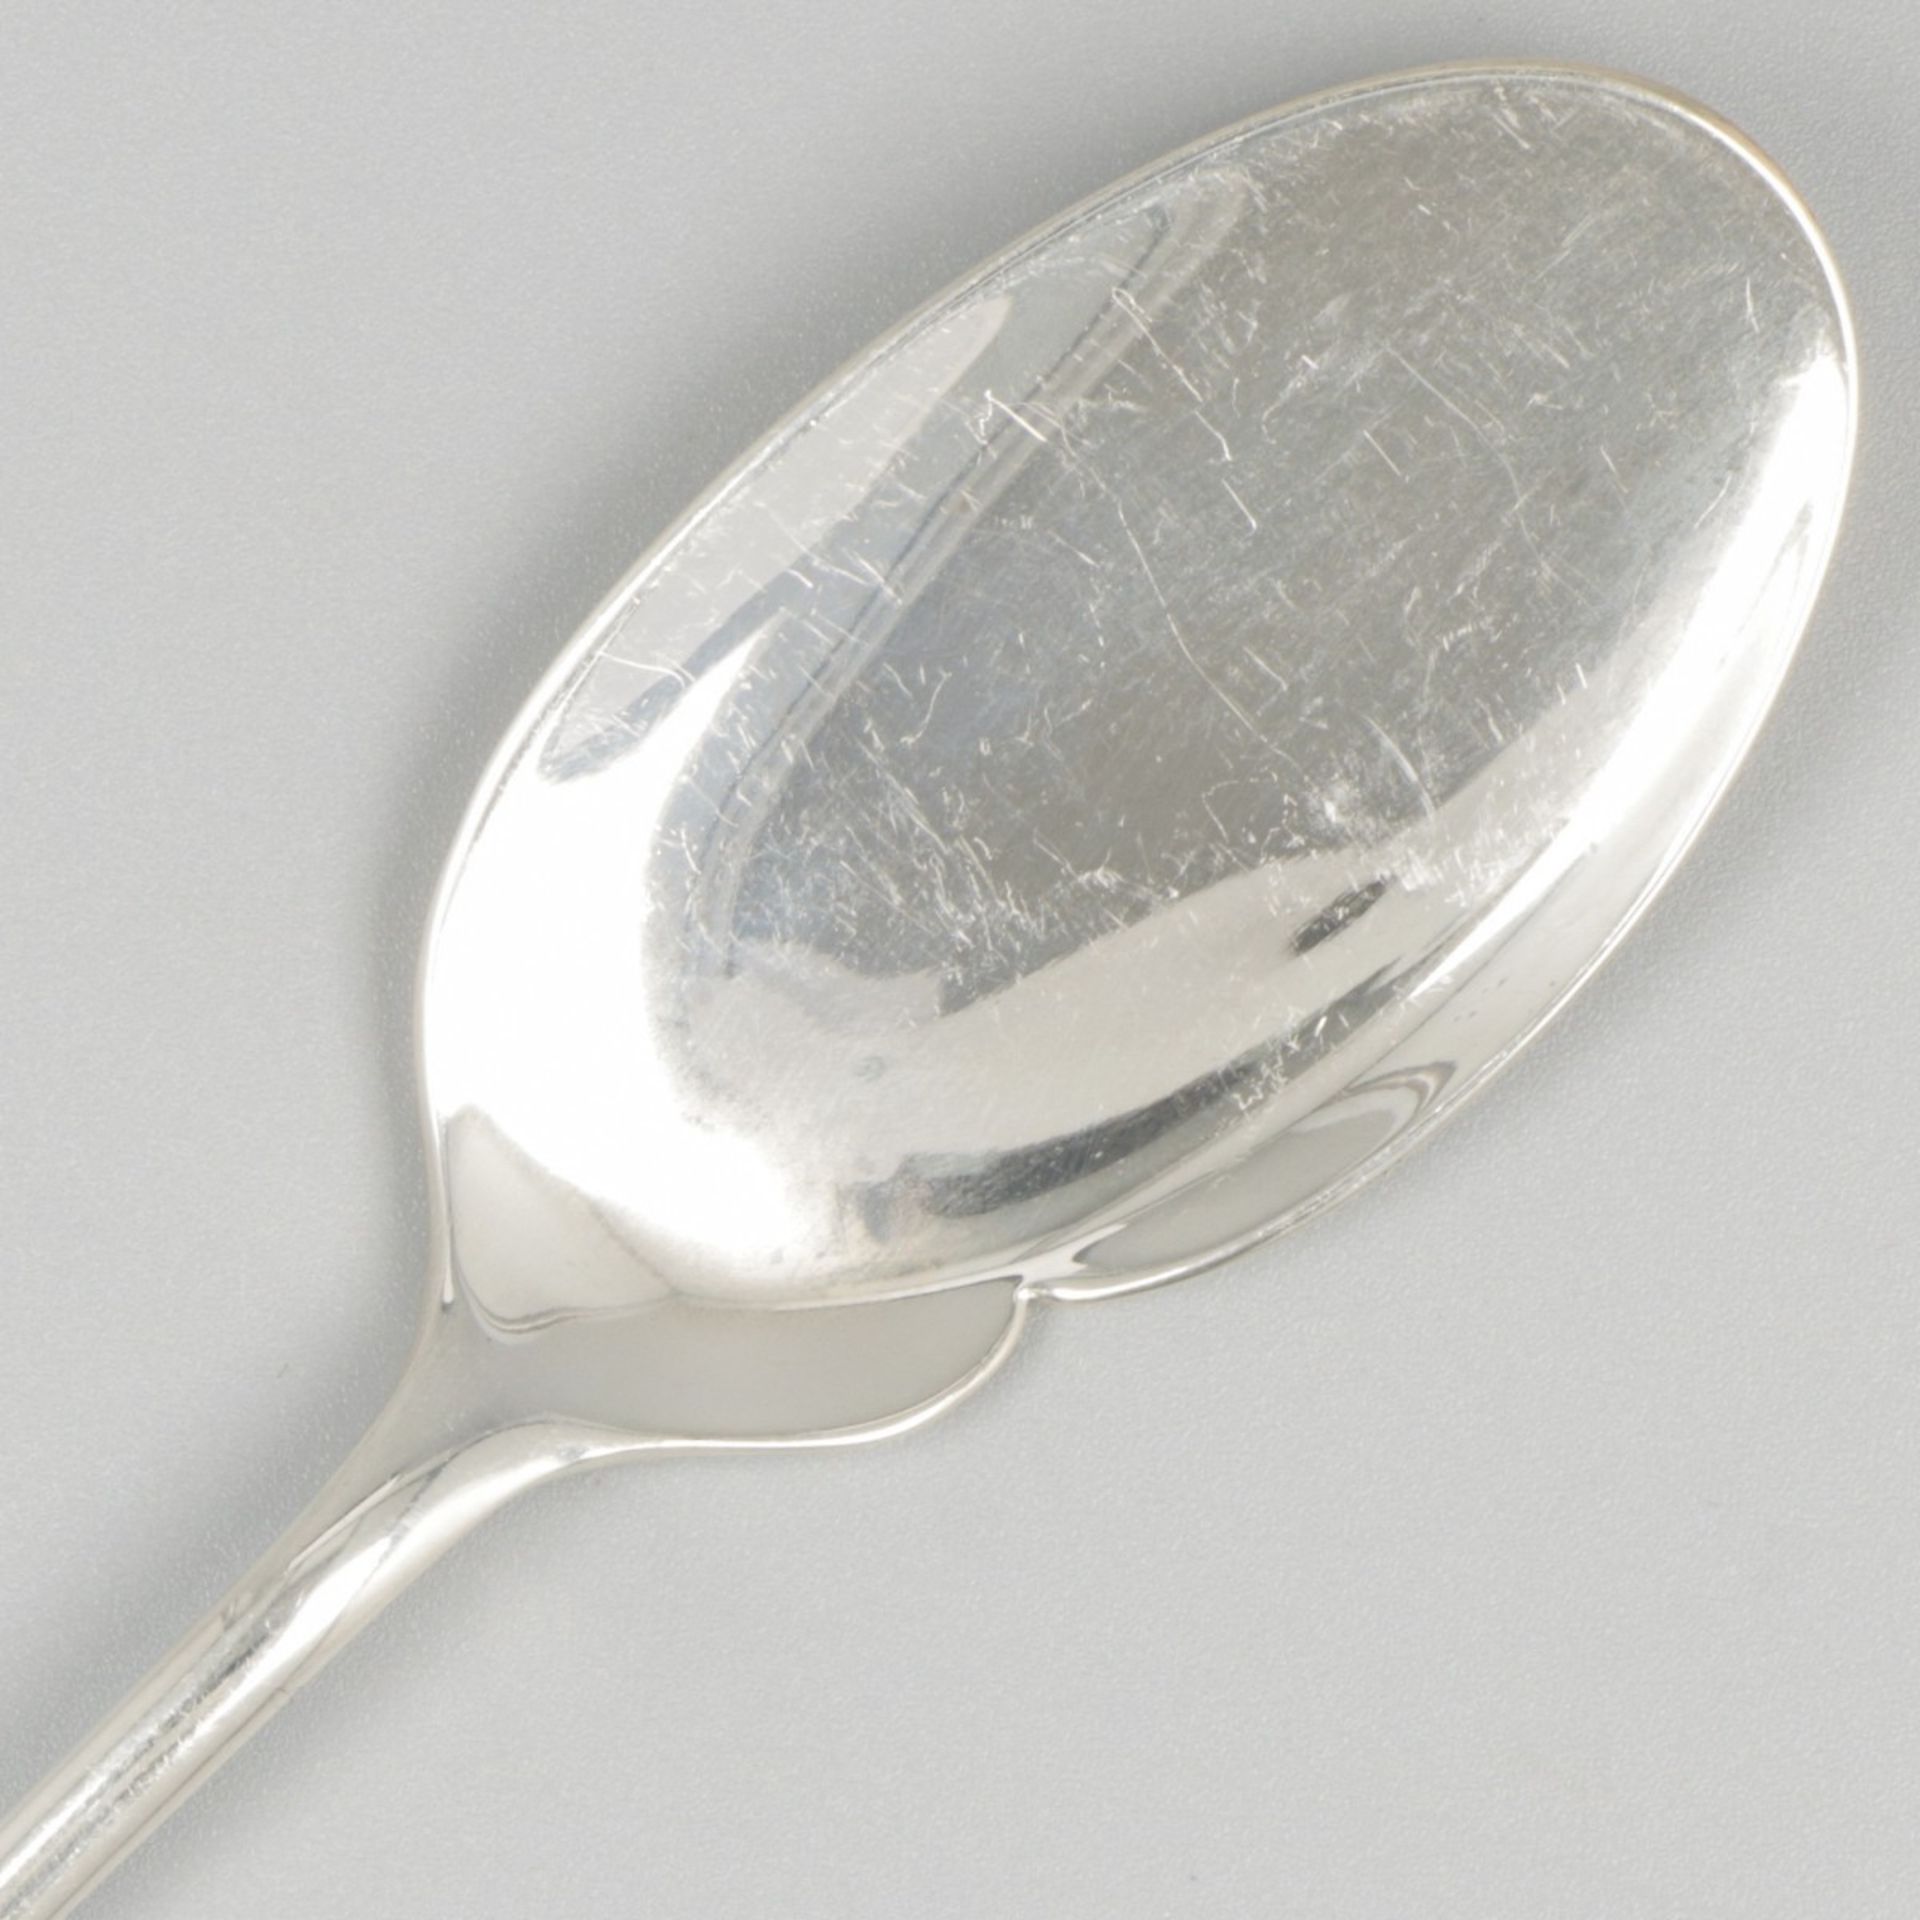 8-piece set of ice cream scoops silver. - Image 6 of 7